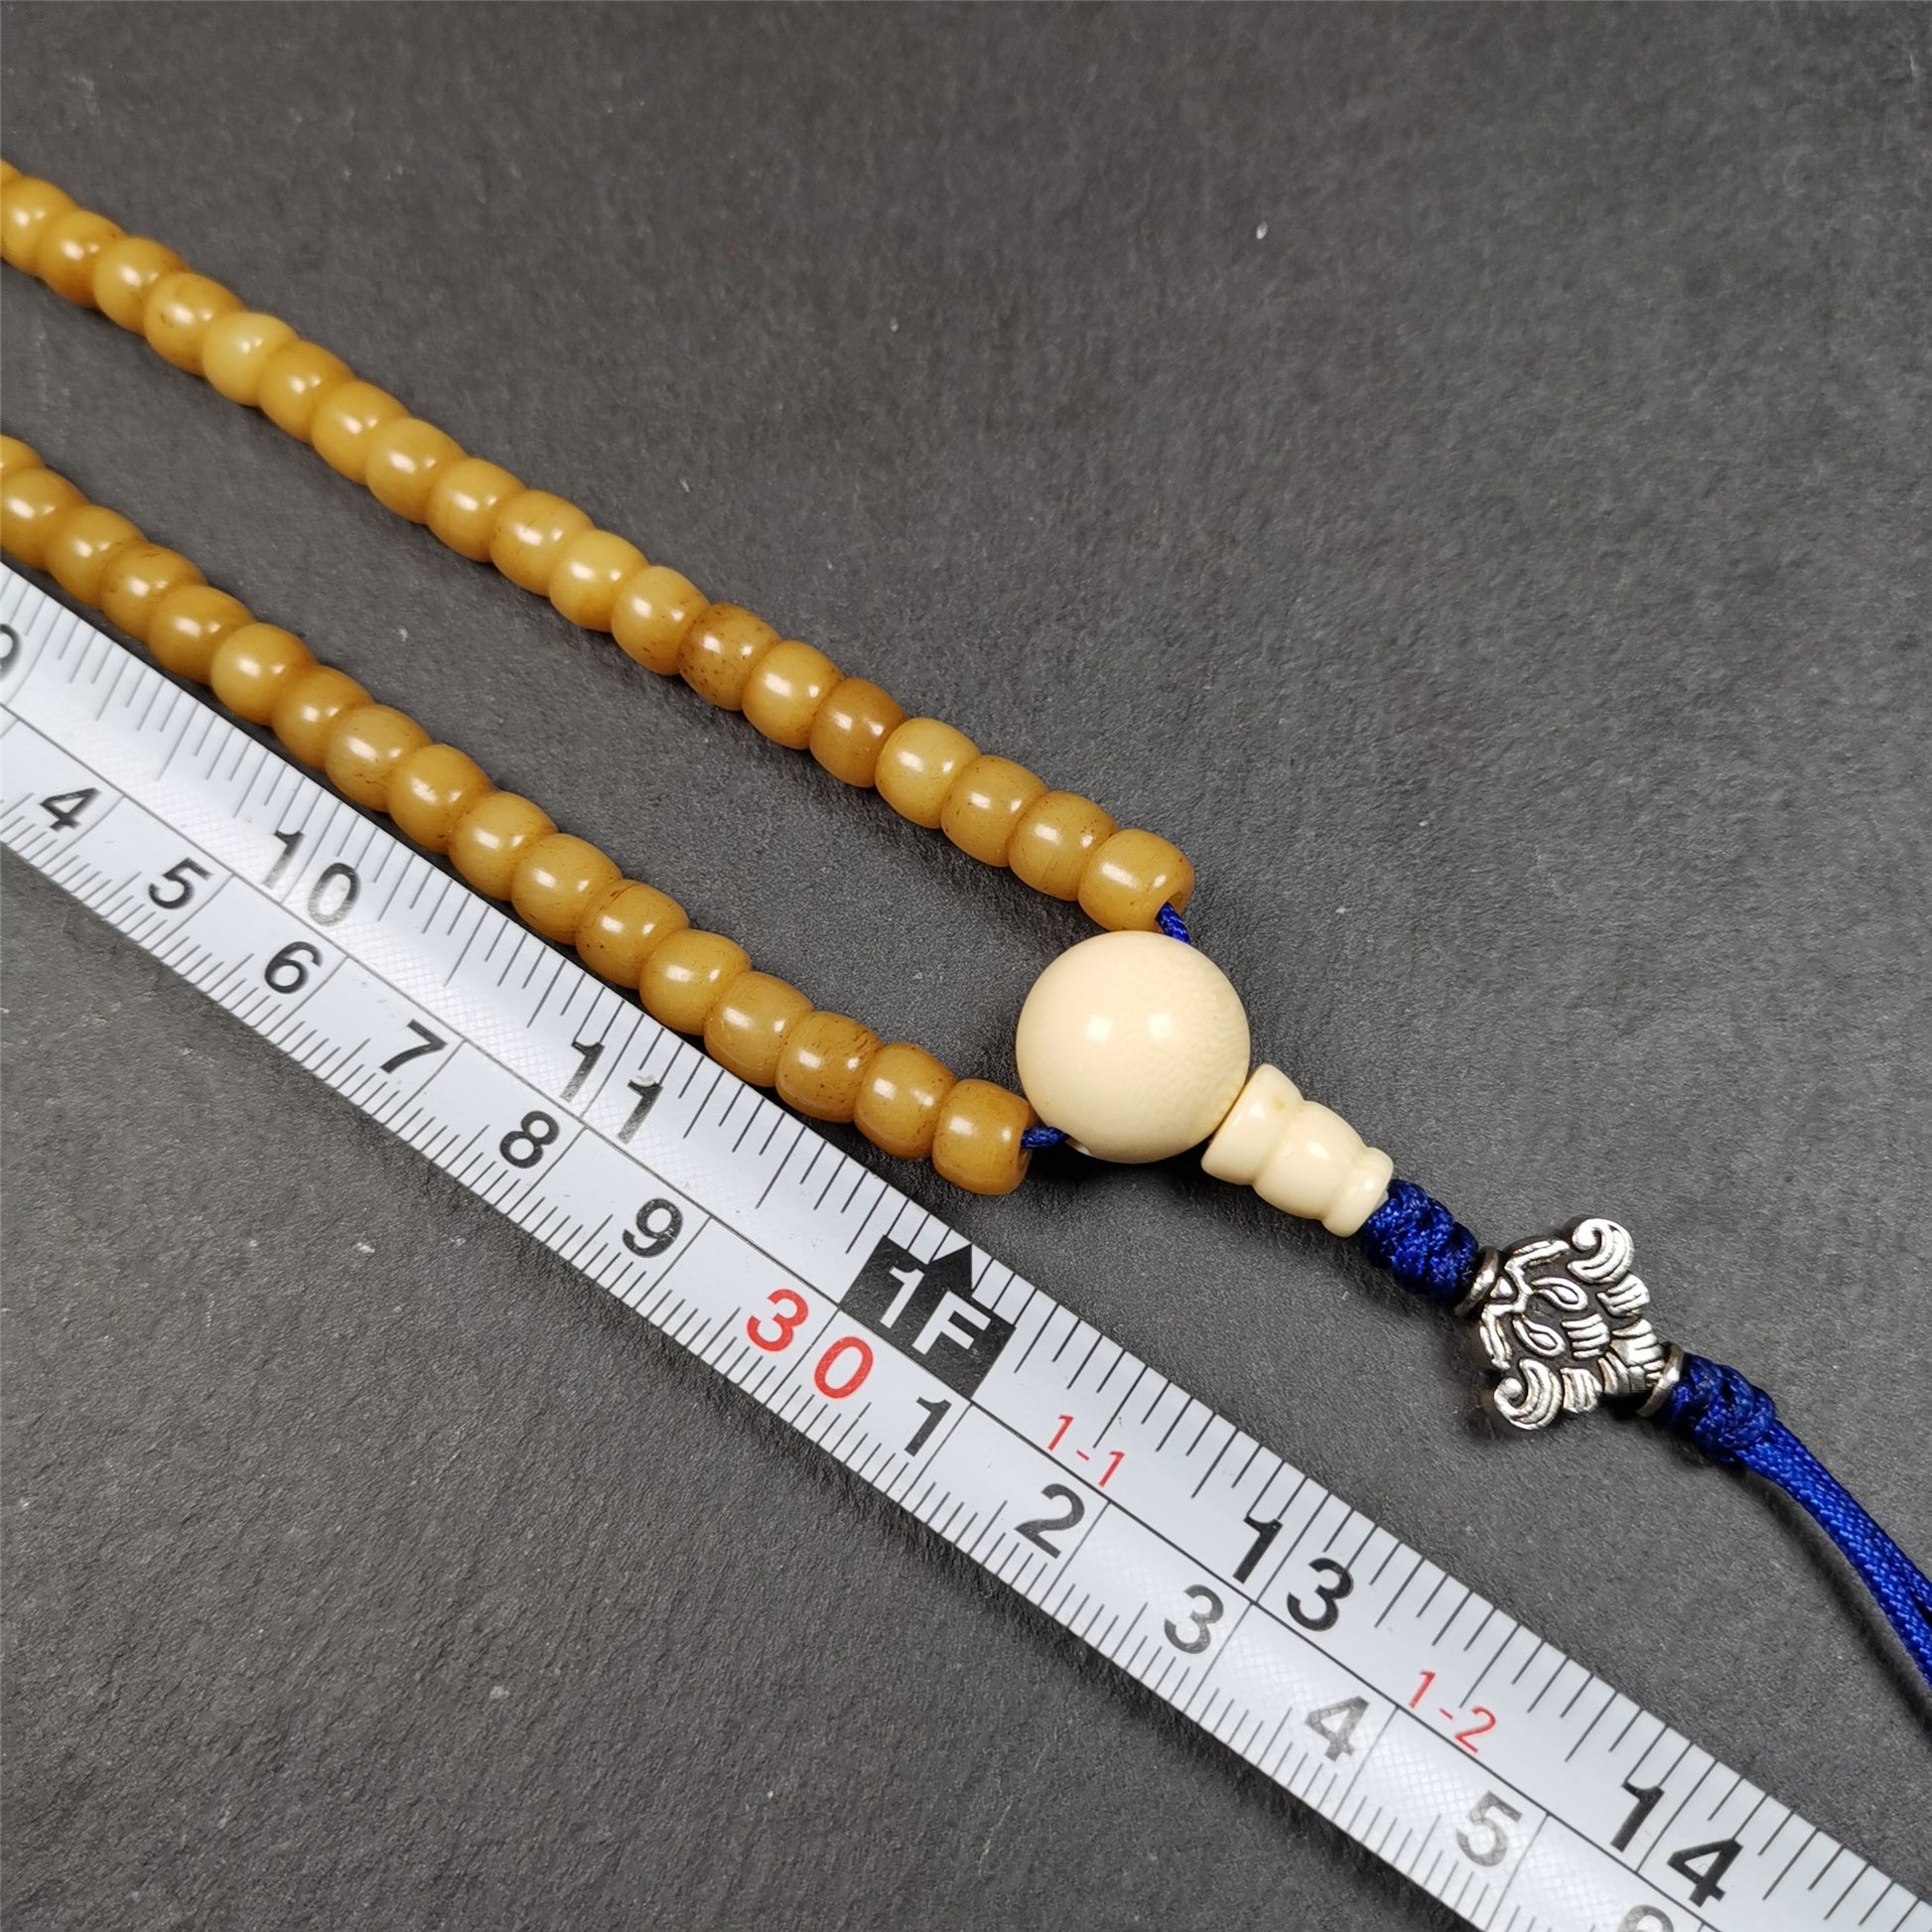 This yak bone mala was handmade from tibetan crafts man in Baiyu County. It's composed of 108 pcs 7mm bone beads,with agate and turquoise beads,guru bead,and mani jewel pendant.